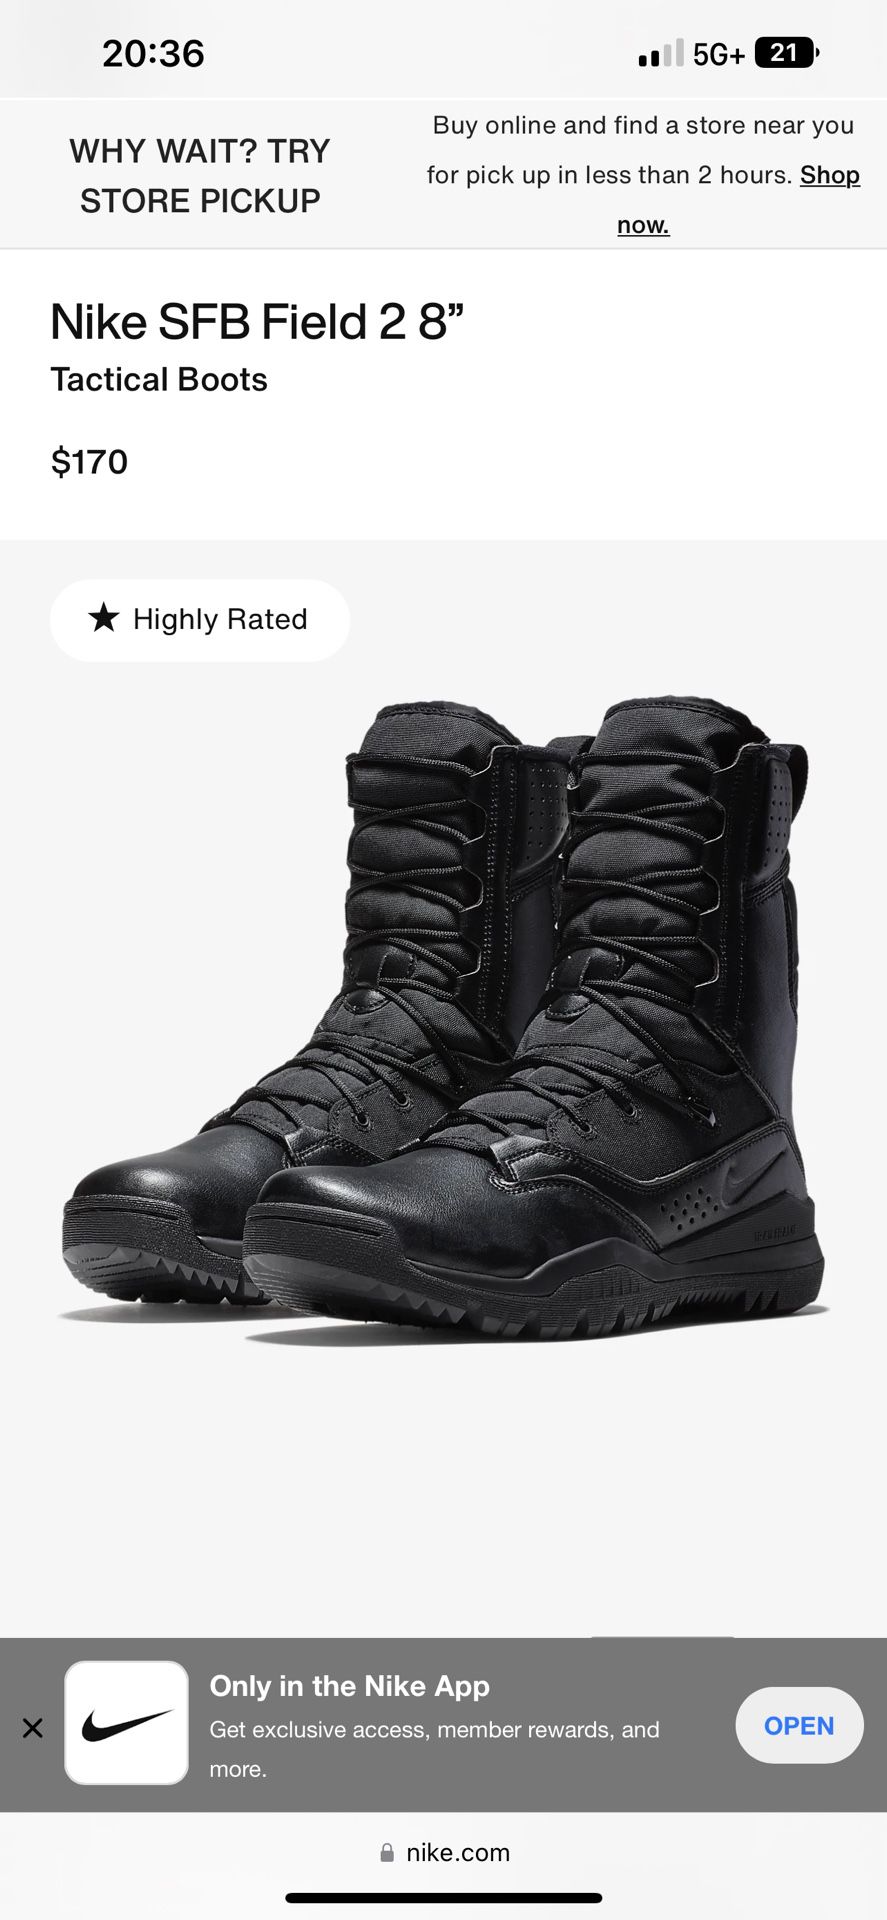 Nike Boots Mens(6) Womens(7.5) $90obo